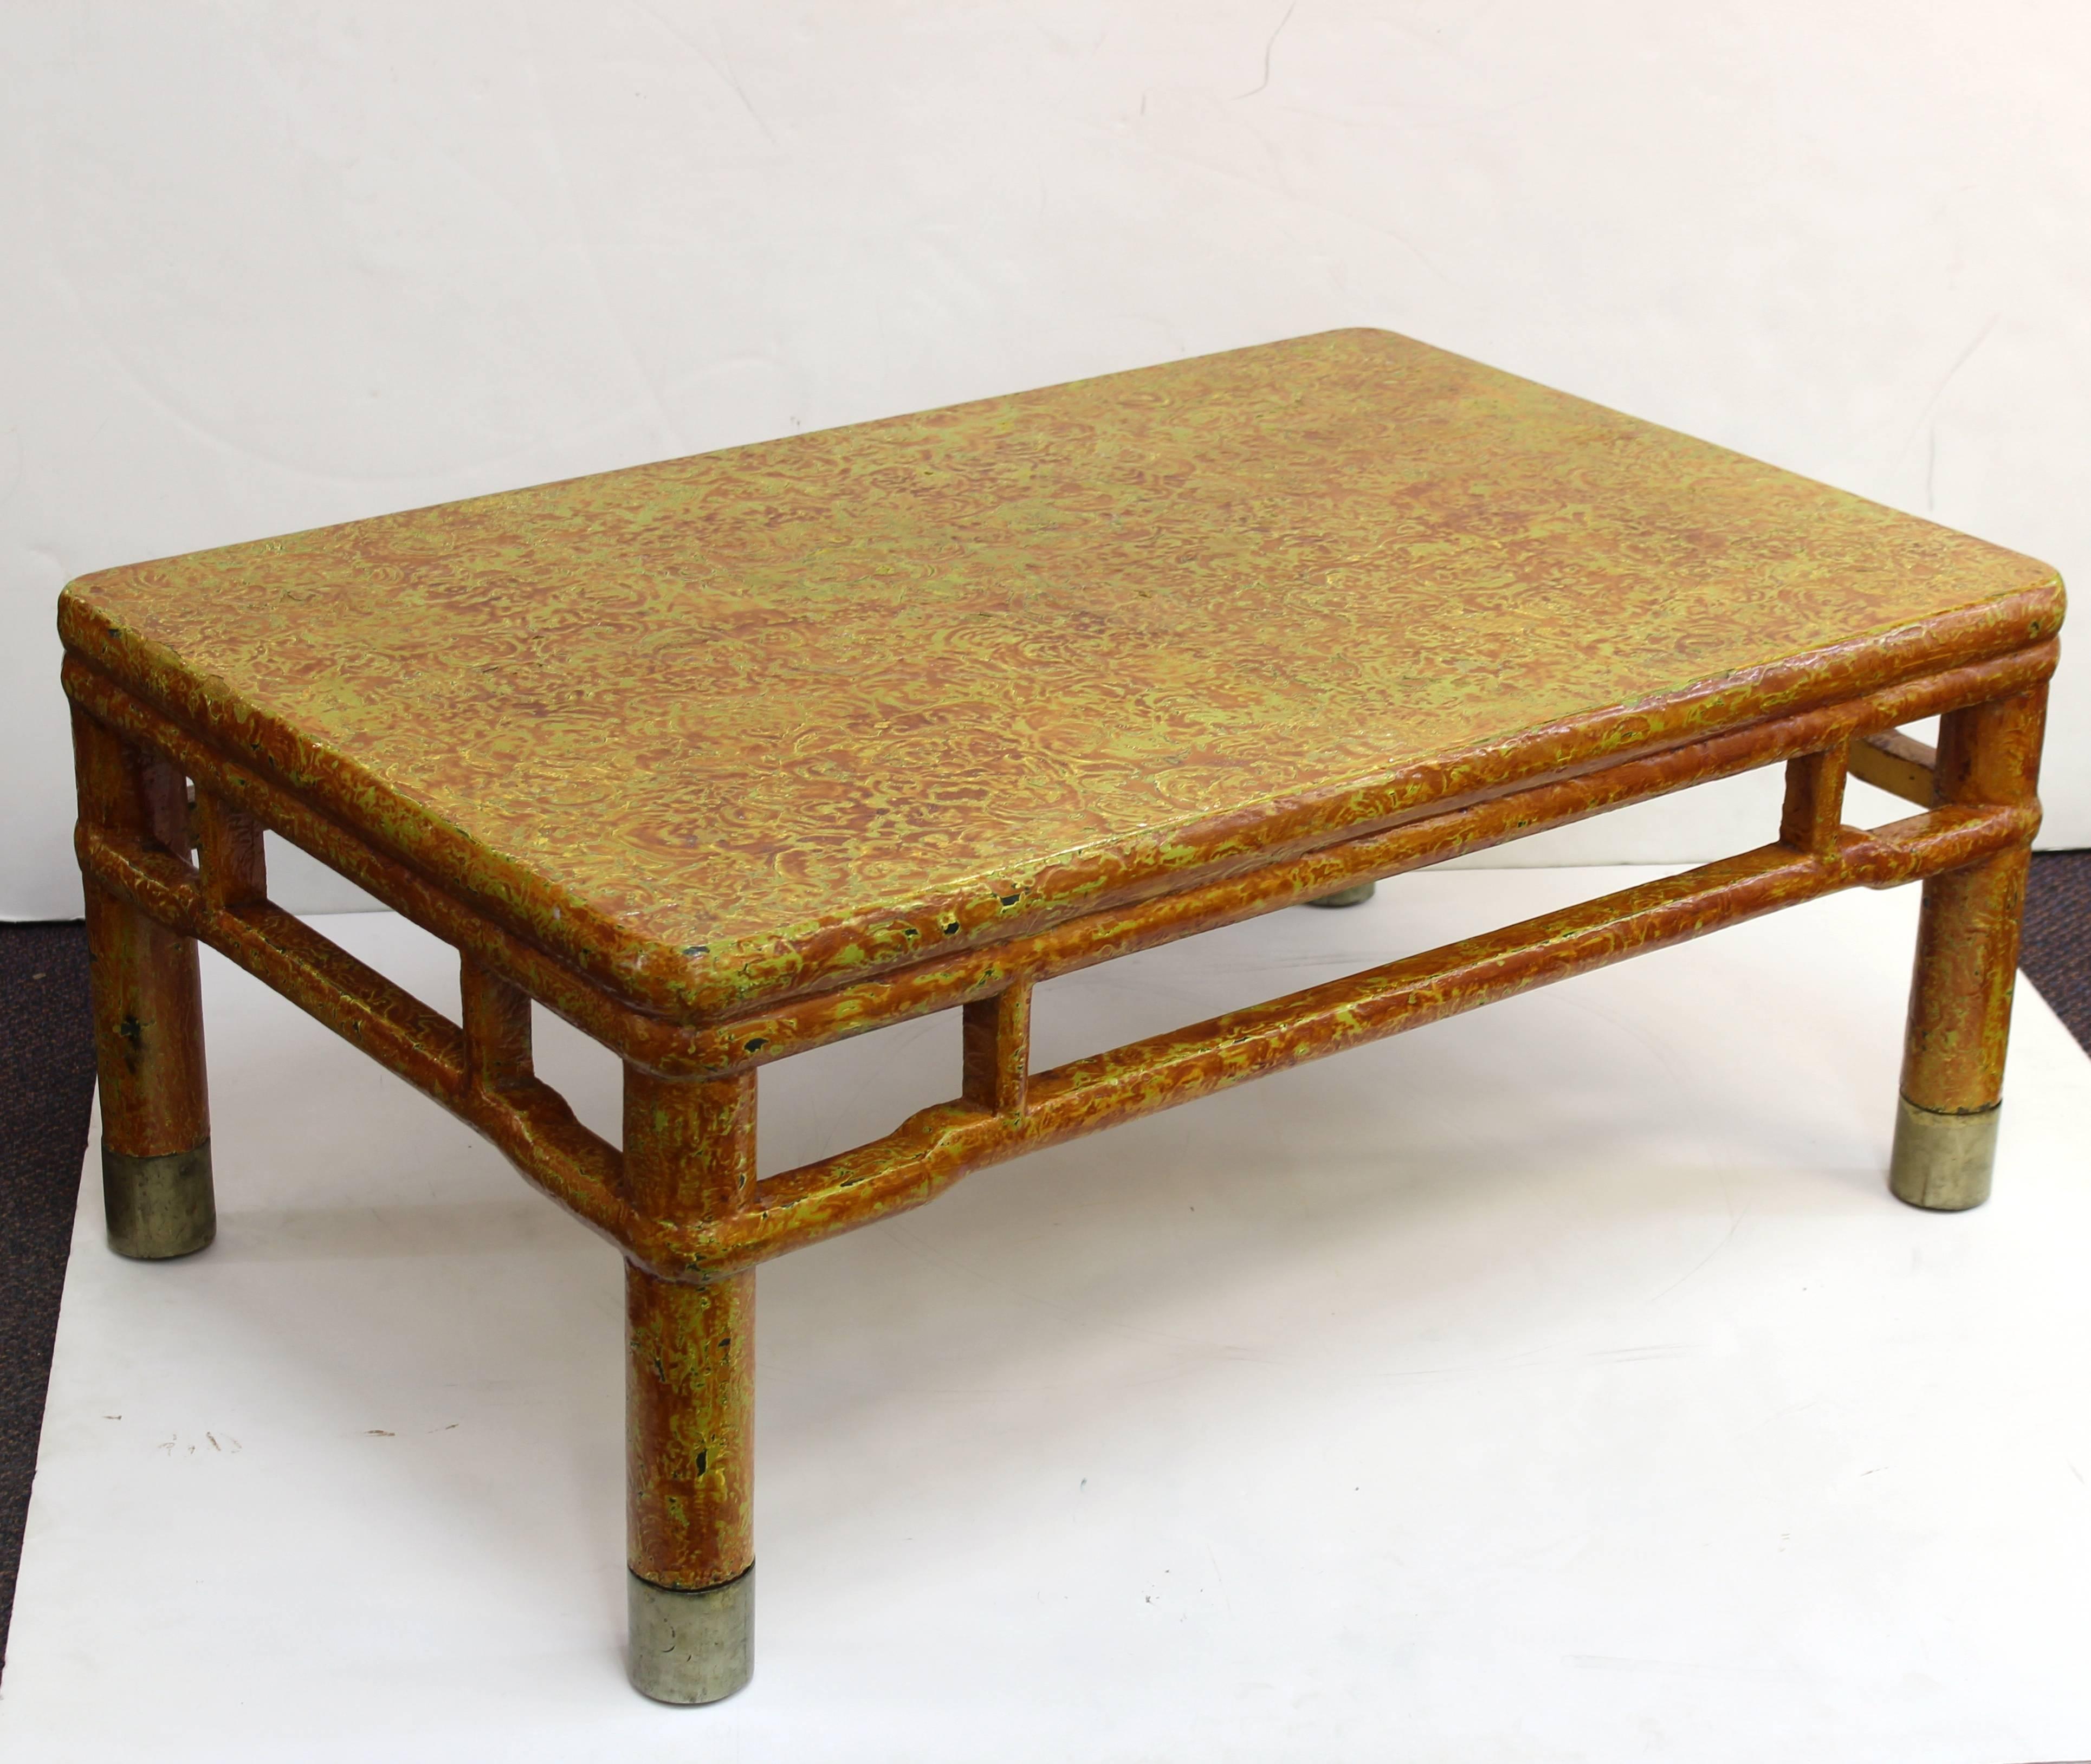 20th Century Asian Style Cocktail Table with Craquelure Finish